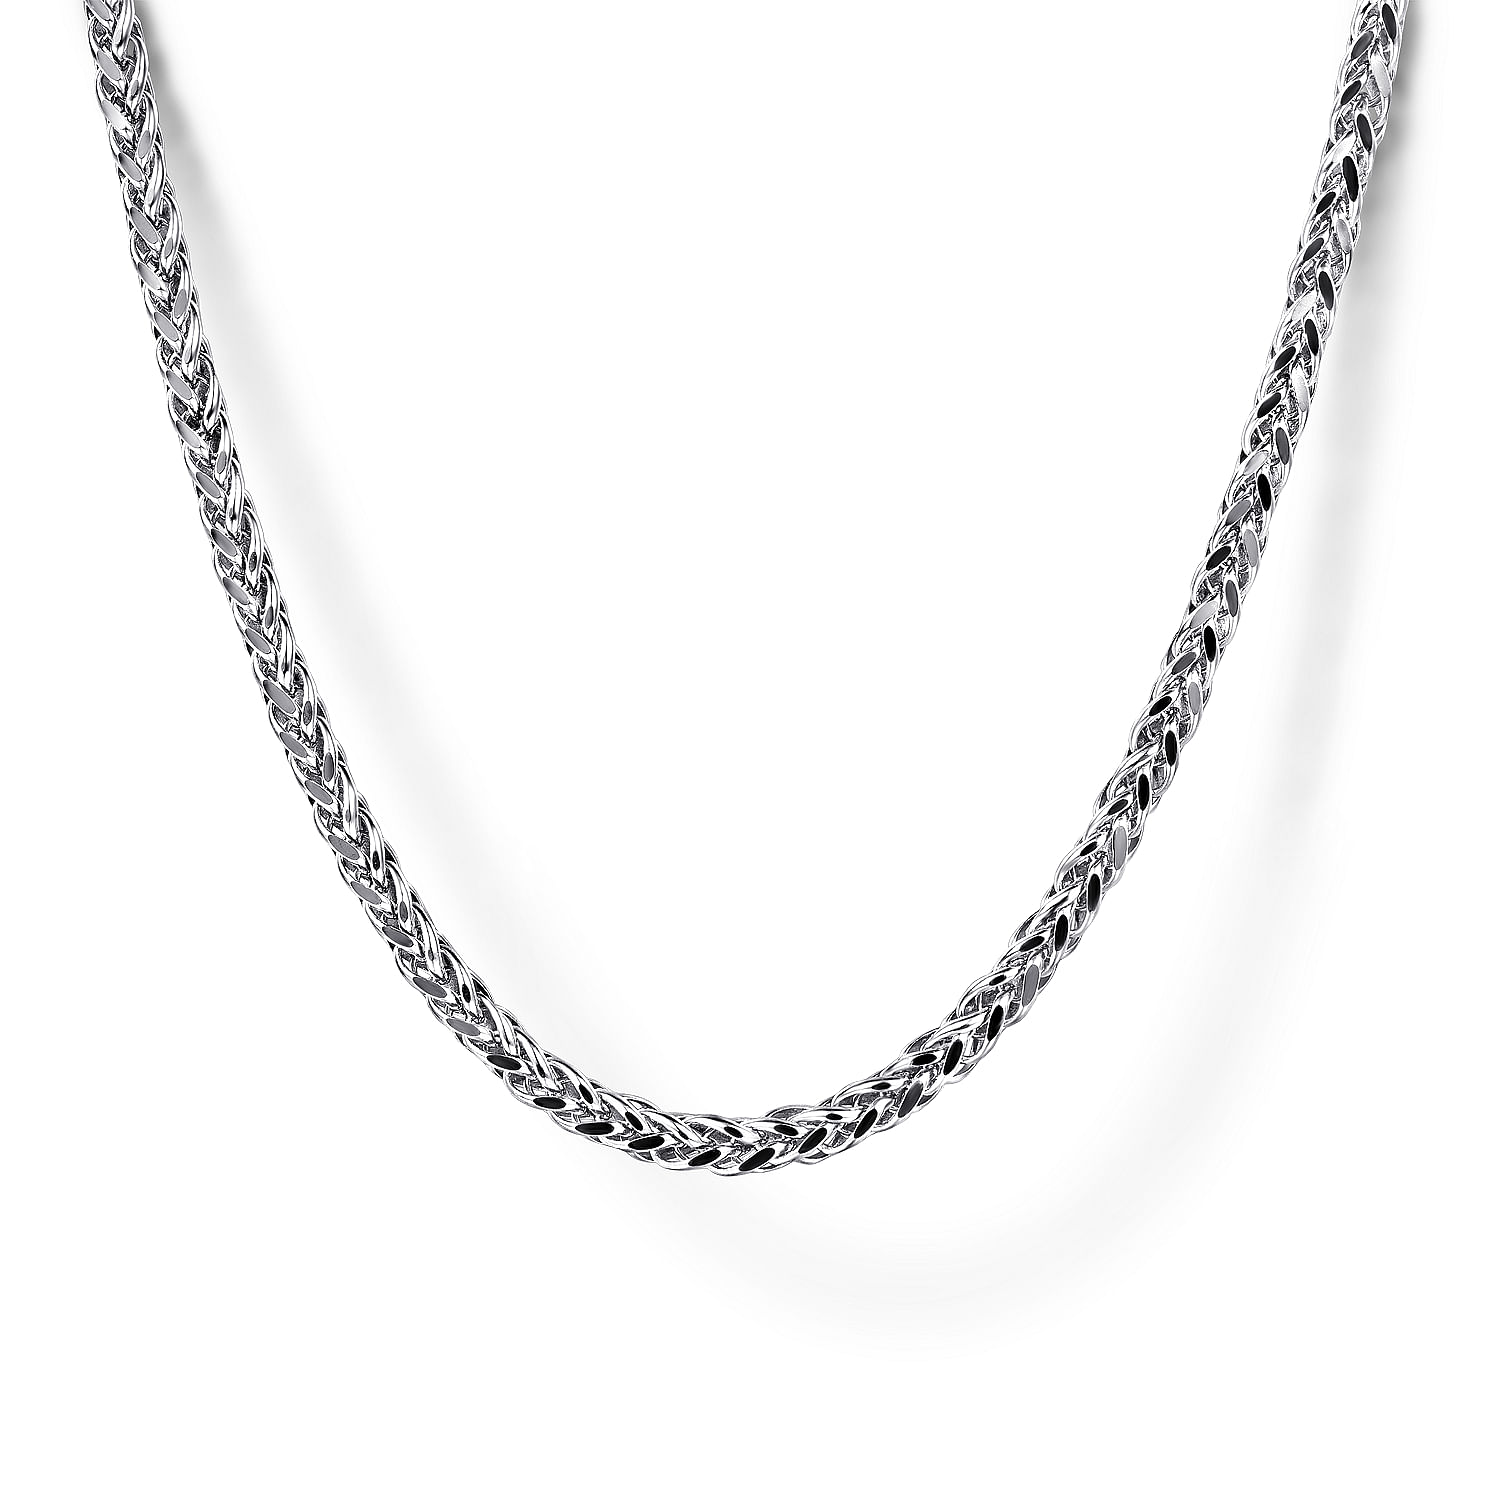 20 Inch 925 Sterling Silver Men's Wheat Chain Necklace 